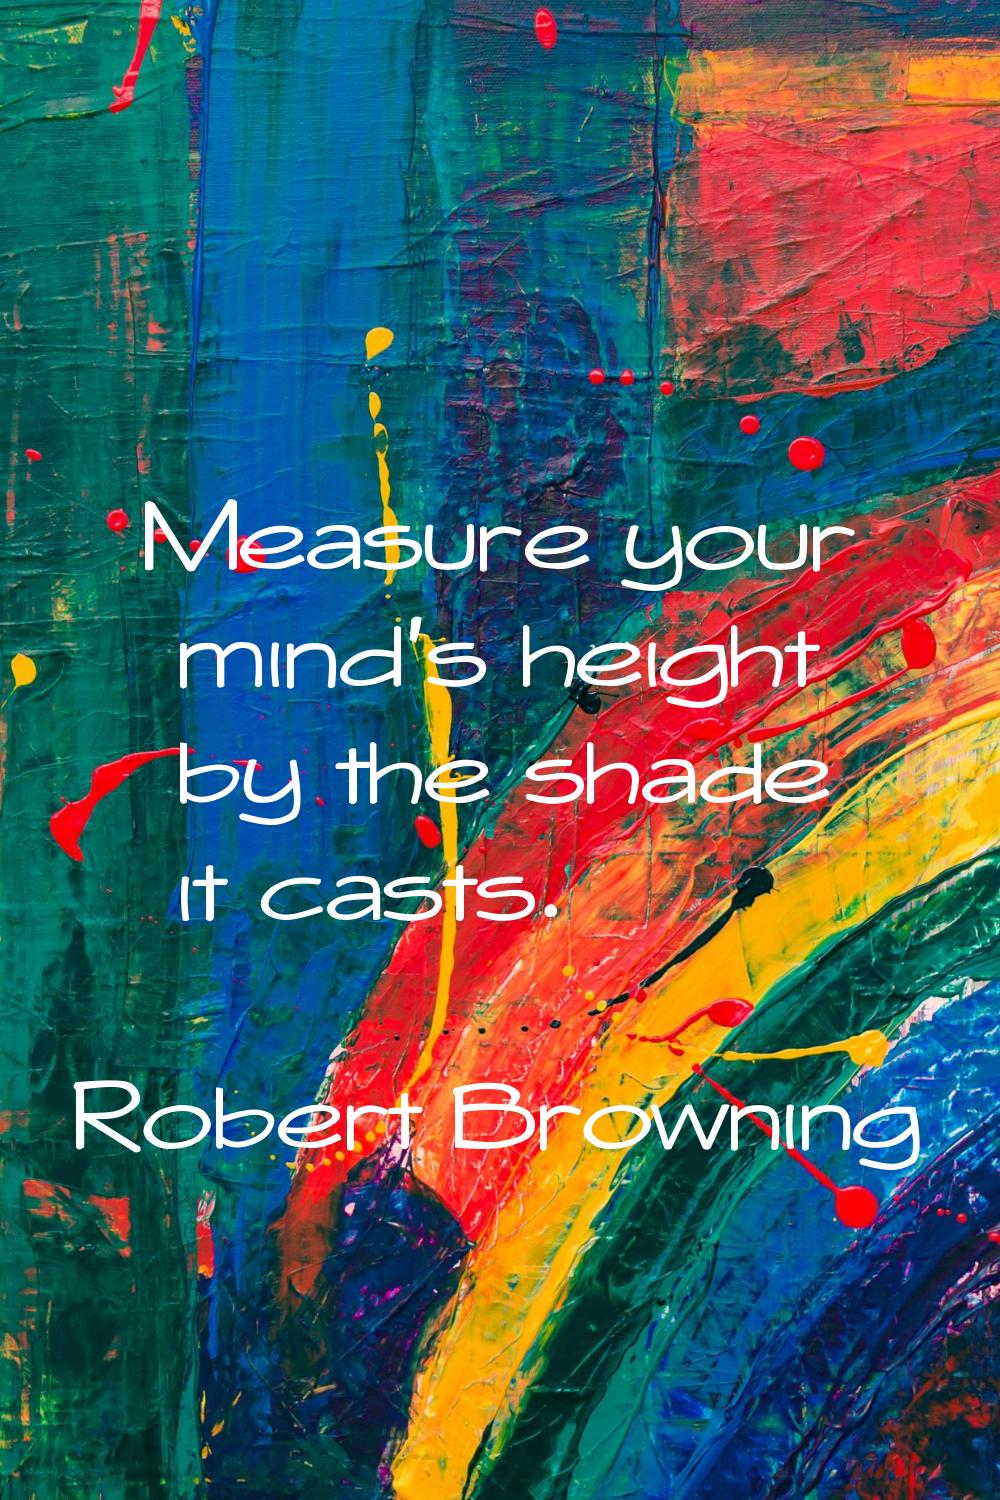 Measure your mind's height by the shade it casts.